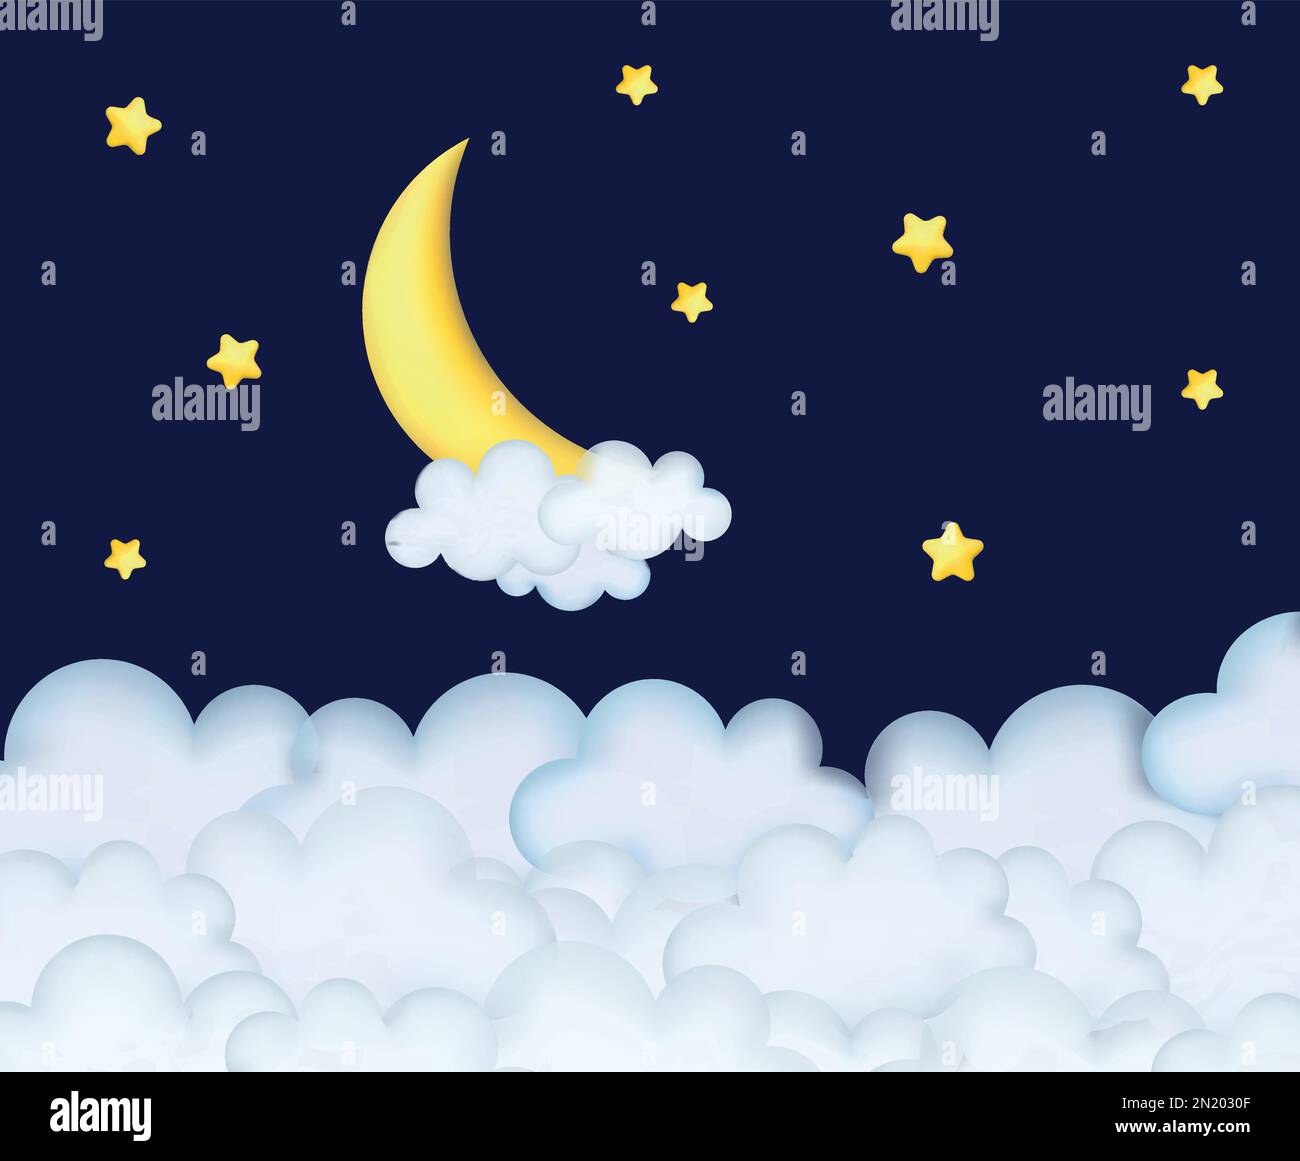 Crescent moon, golden stars and white clouds 3d style isolated on blue background. Dream, lullaby, dreams background design for banner, booklet, poste Stock Vector